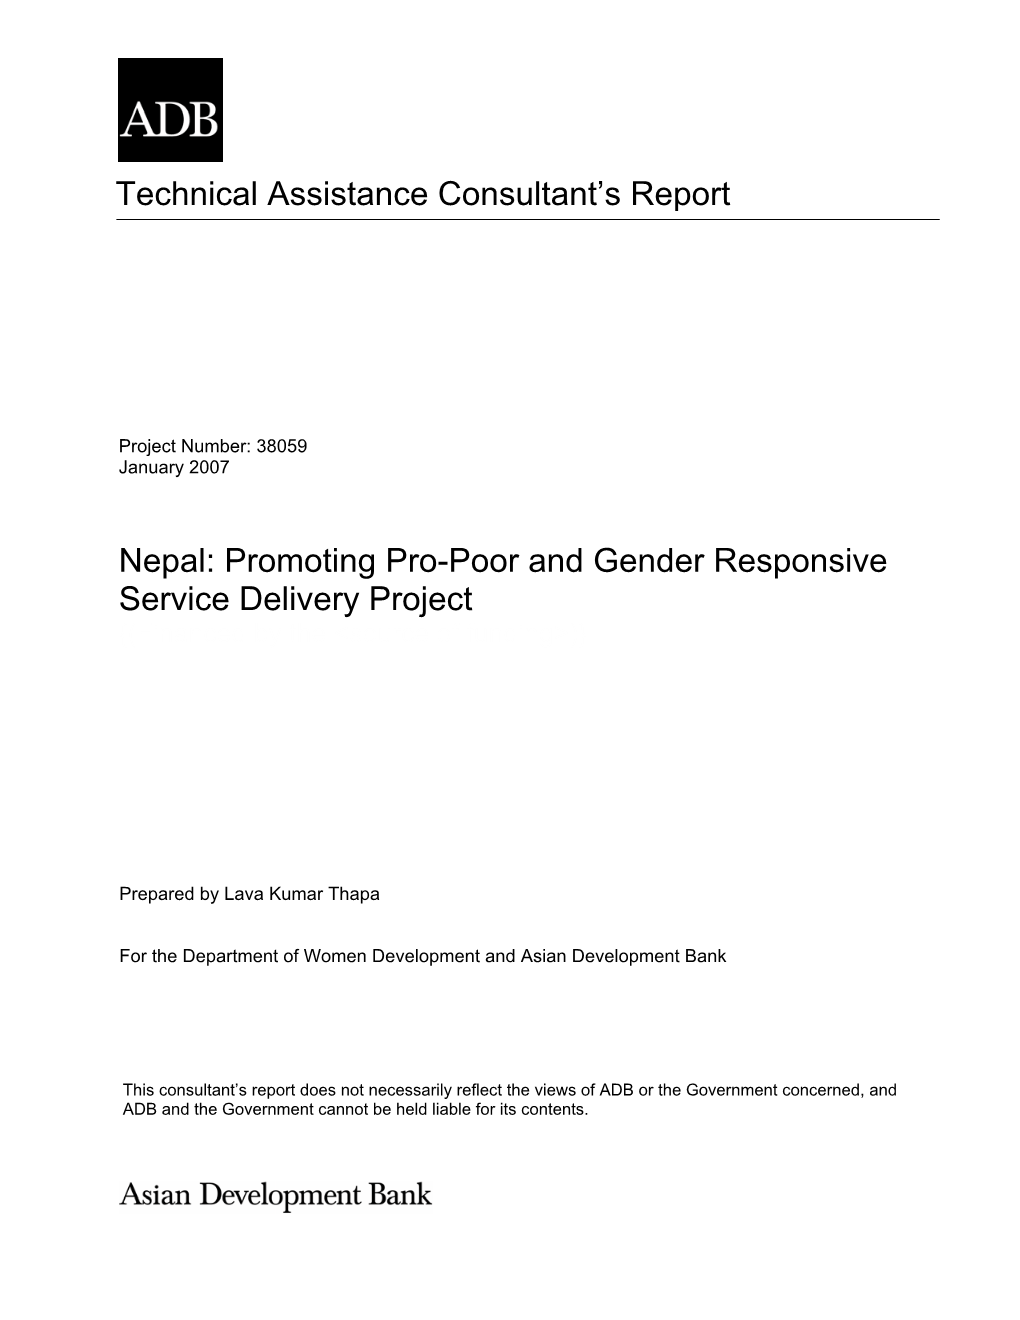 Promoting Pro-Poor and Gender Responsive Service Delivery Project